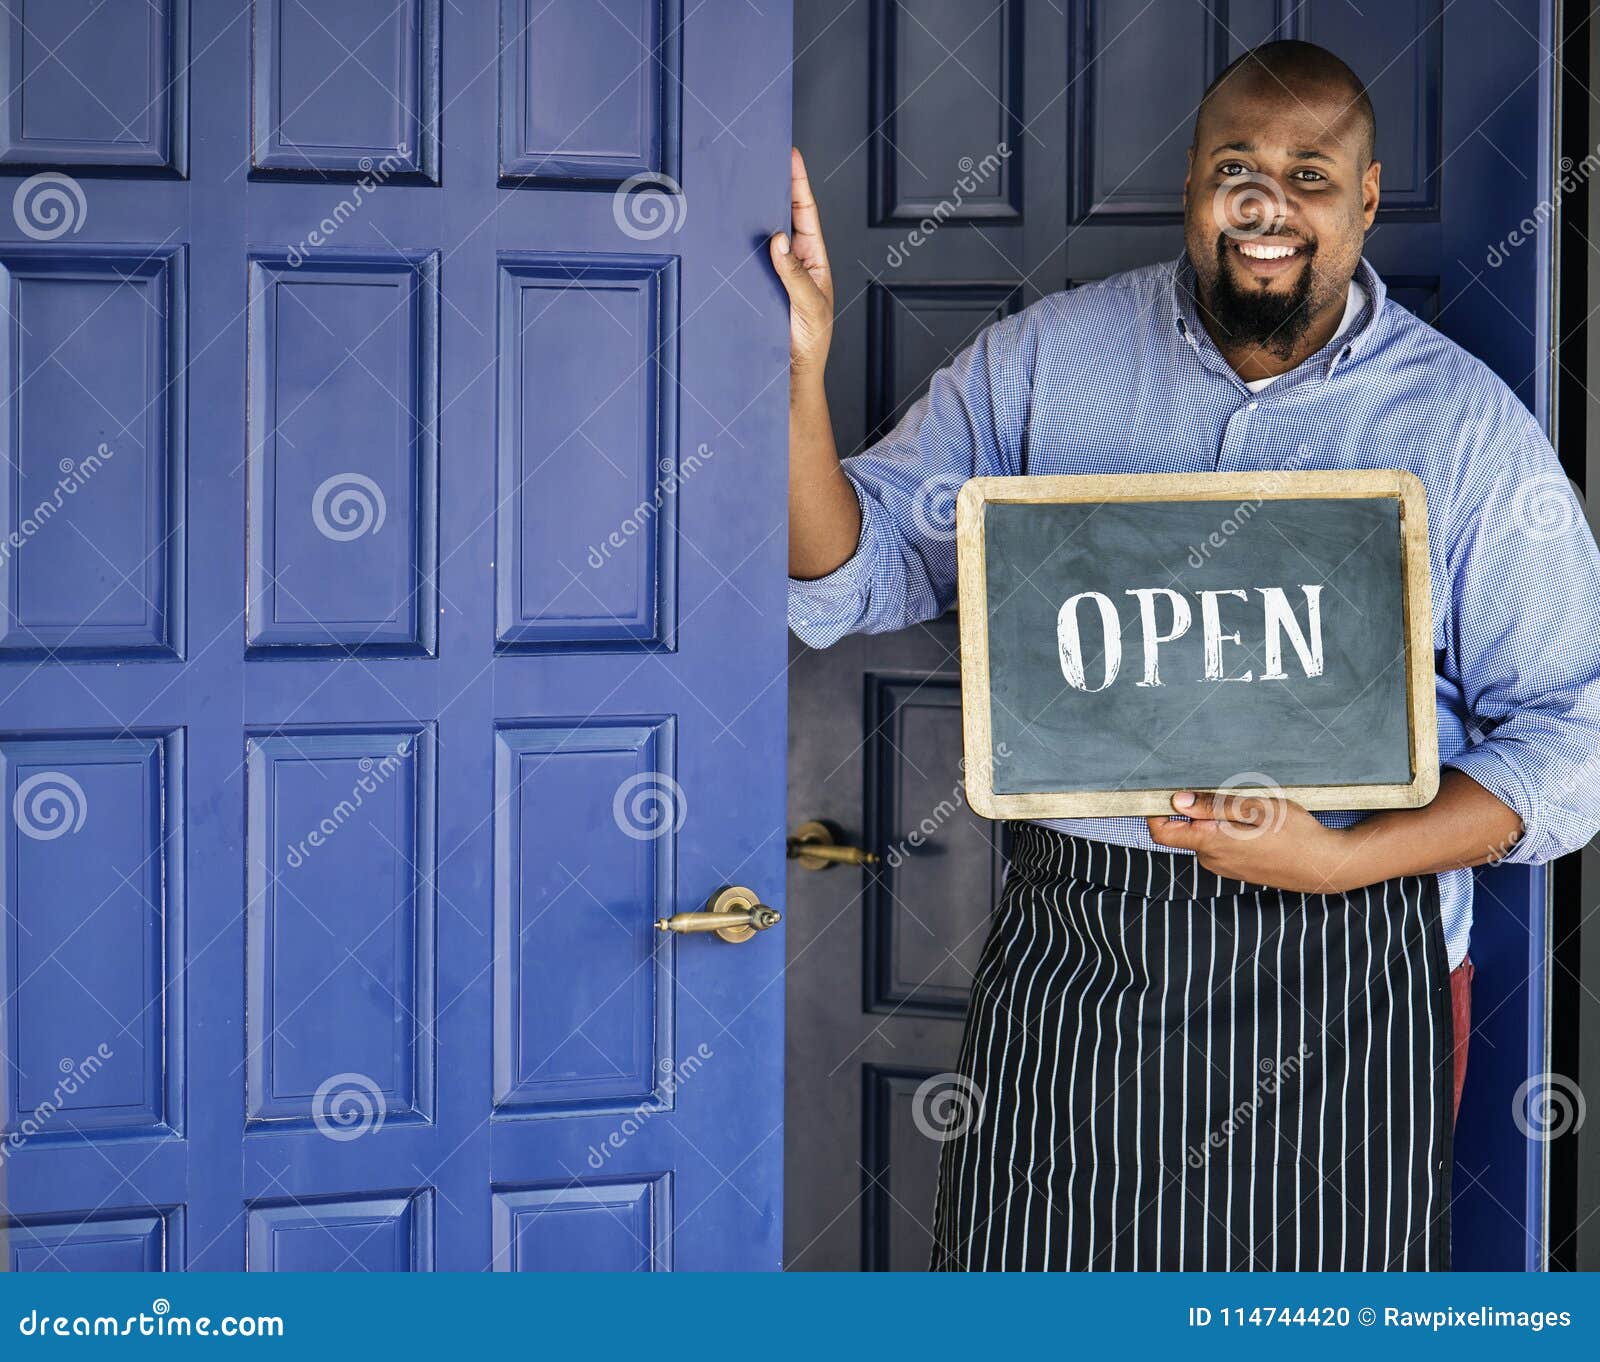 a cheerful small business owner with open sign